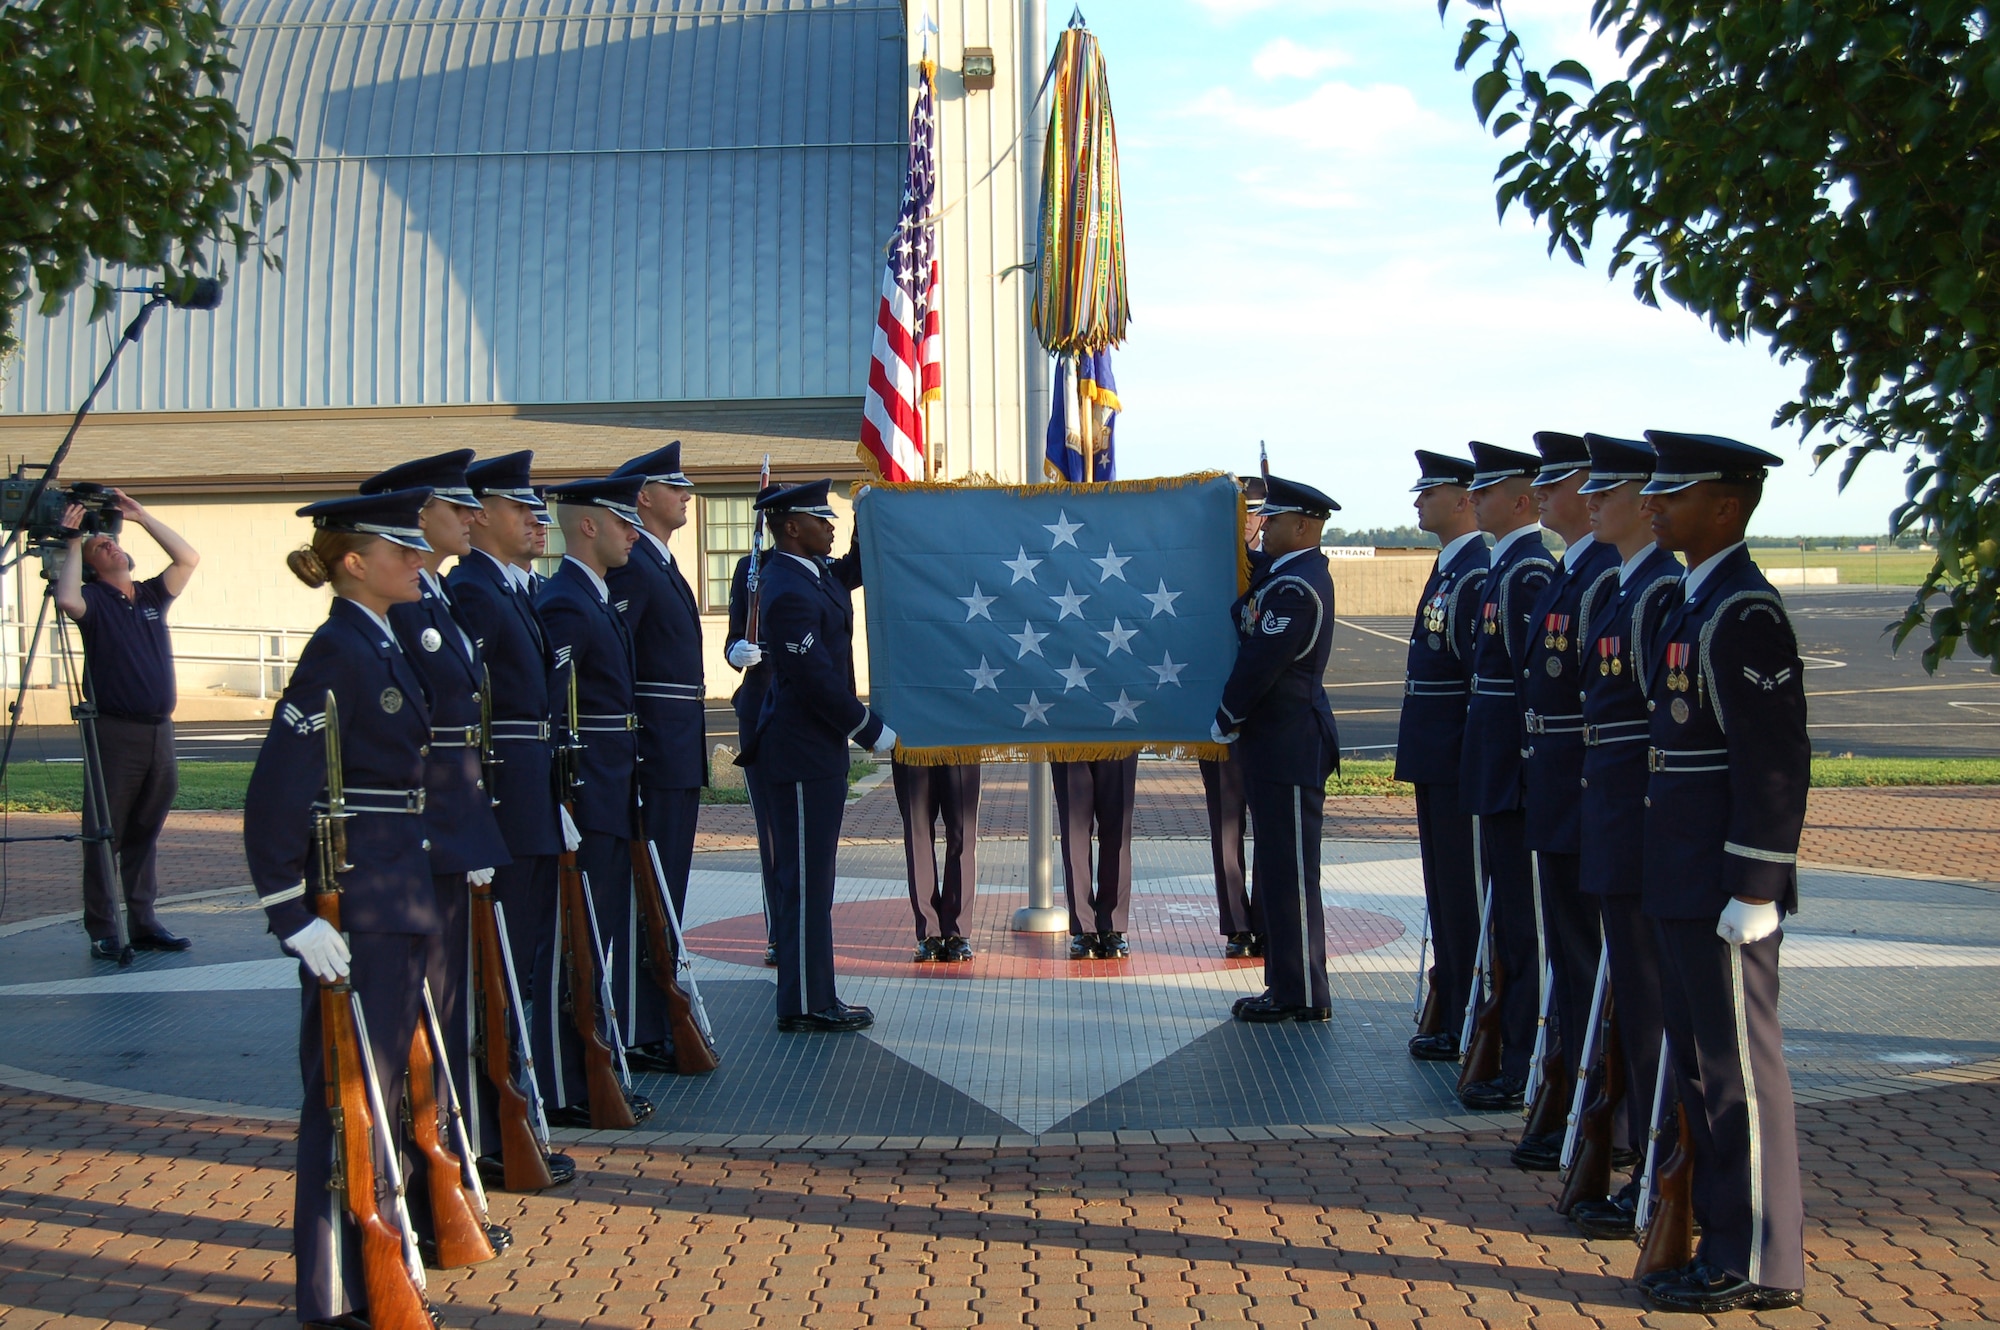 The Air Force Honor Guard from Bolling Air Force Base, Washington, D.C., was recently filmed at the Air Mobility Command Museum here for a Medal of Honor flag-folding video that will be presented to Air Force Medal of Honor recipients at the Medal of Honor Convention aboard the USS Constellation in Boston at the end of September. Every living Medal of Honor recipient or their primary next of kin will be presented the commemorative video and an American flag. (U.S. Air Force photo/2nd Lt. Nicole Langley)